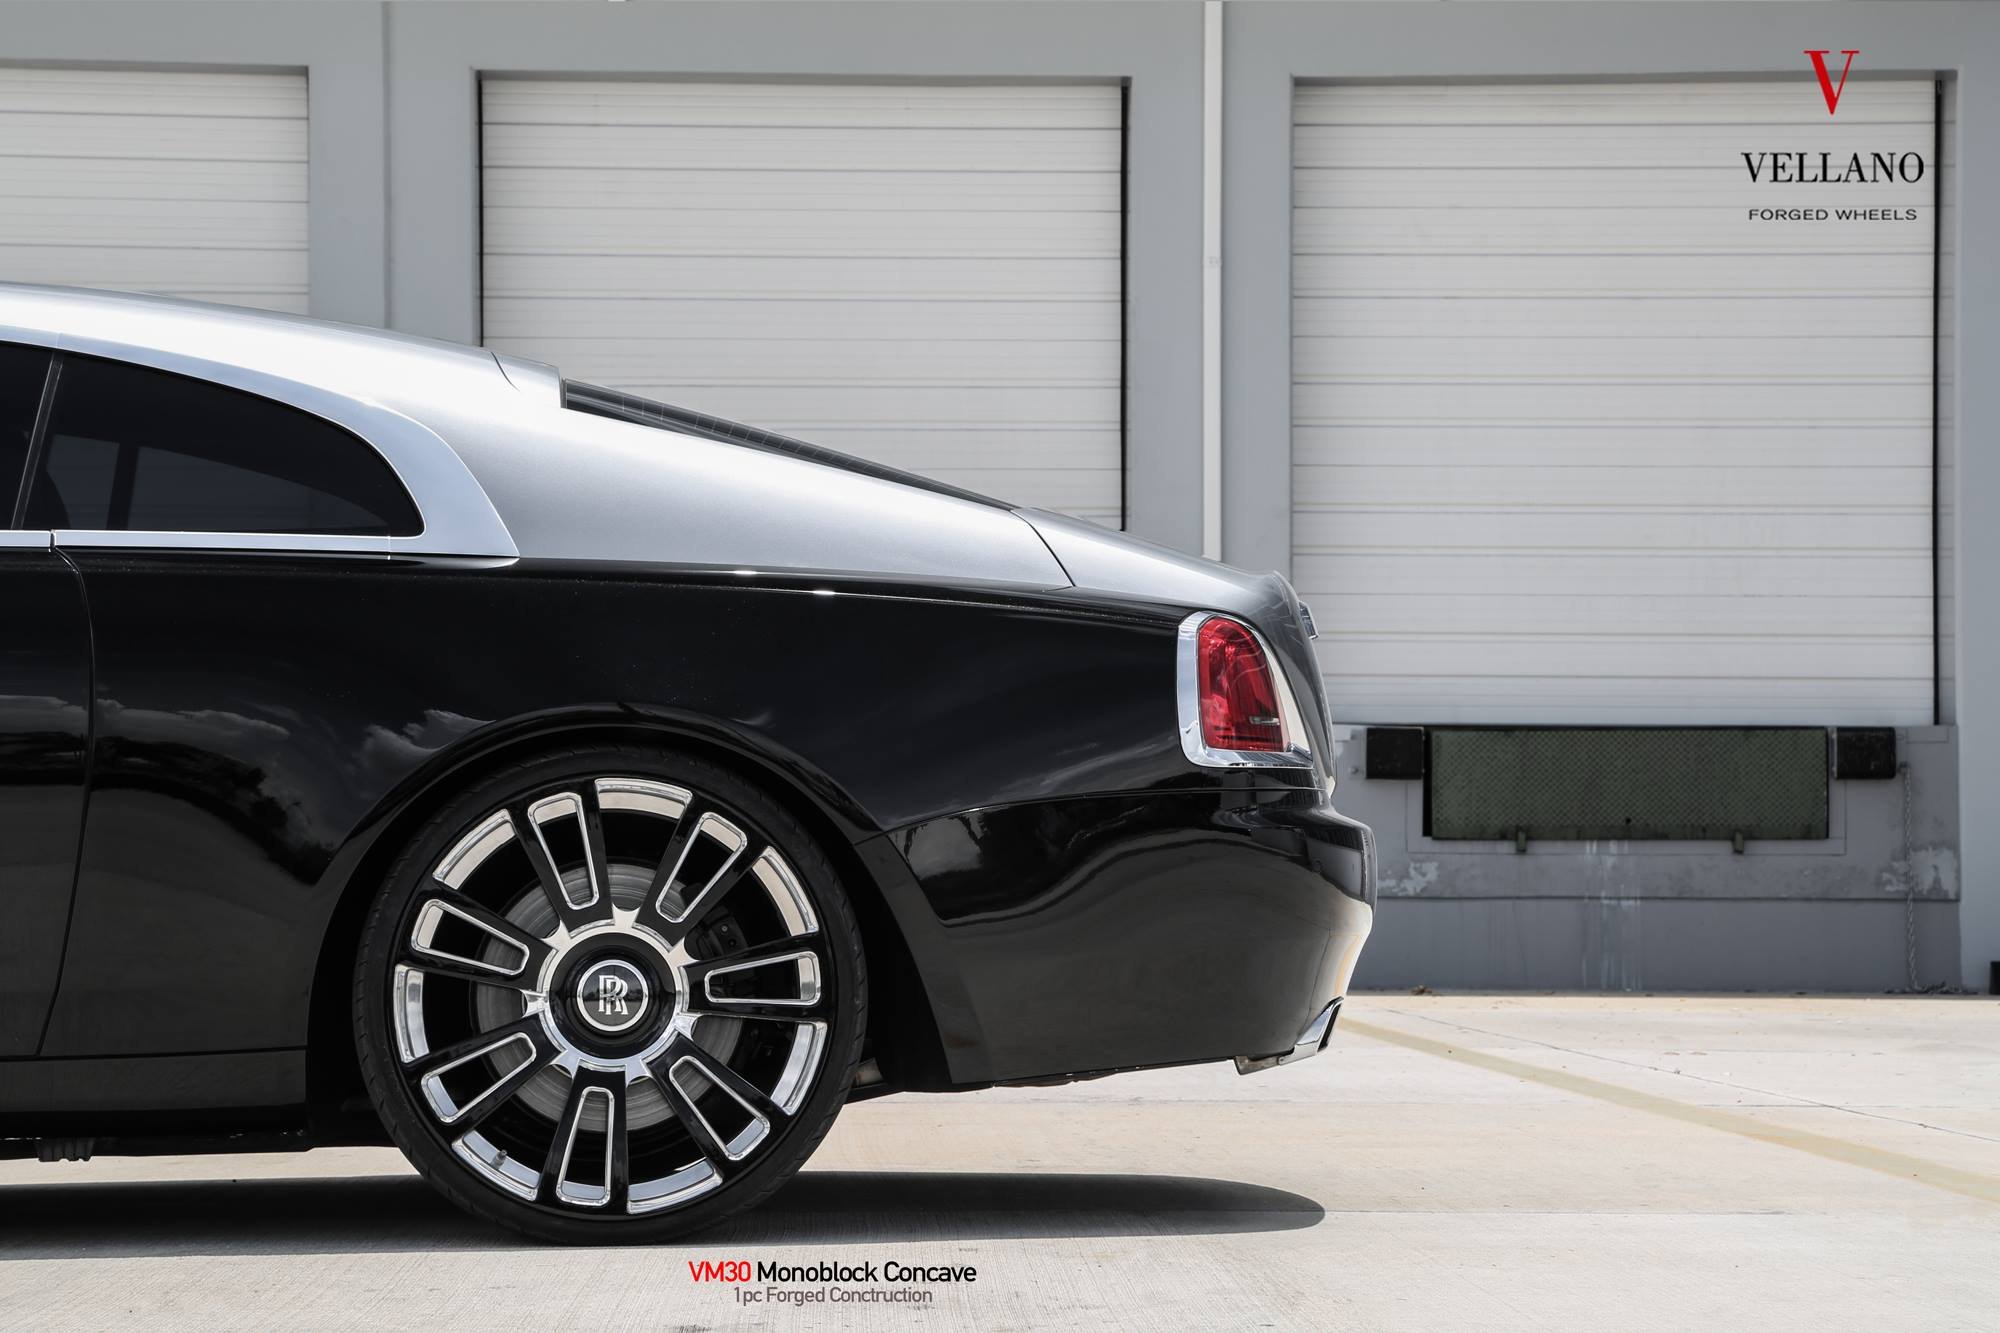 Aftermarket Taillights on Black Rolls Royce Wraith - Photo by Vellano